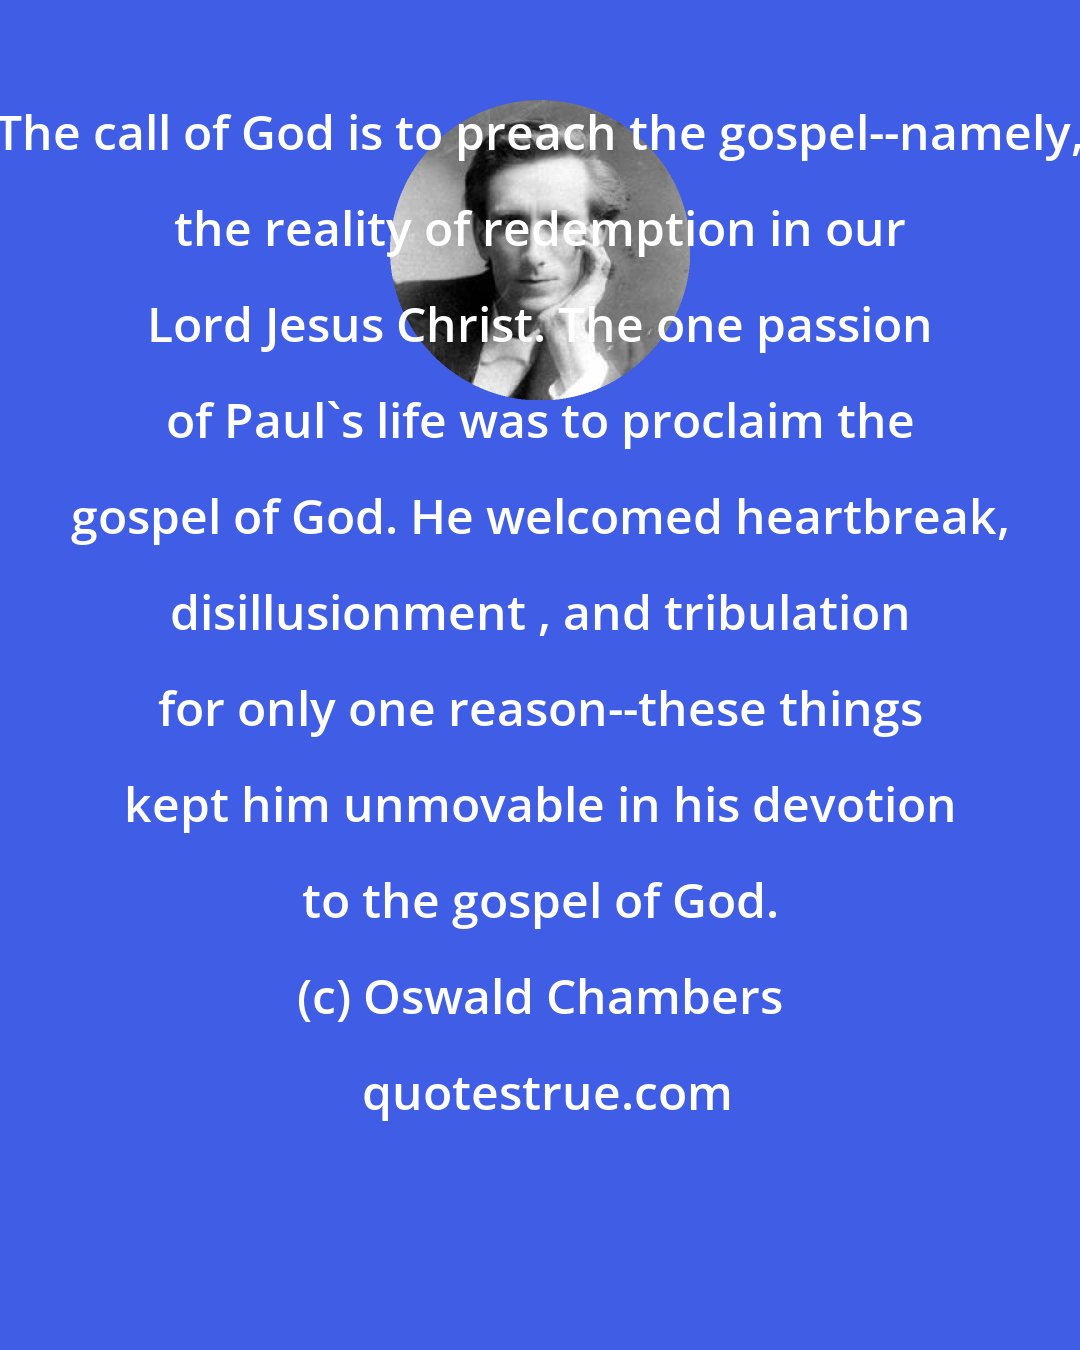 Oswald Chambers: The call of God is to preach the gospel--namely, the reality of redemption in our Lord Jesus Christ. The one passion of Paul's life was to proclaim the gospel of God. He welcomed heartbreak, disillusionment , and tribulation for only one reason--these things kept him unmovable in his devotion to the gospel of God.